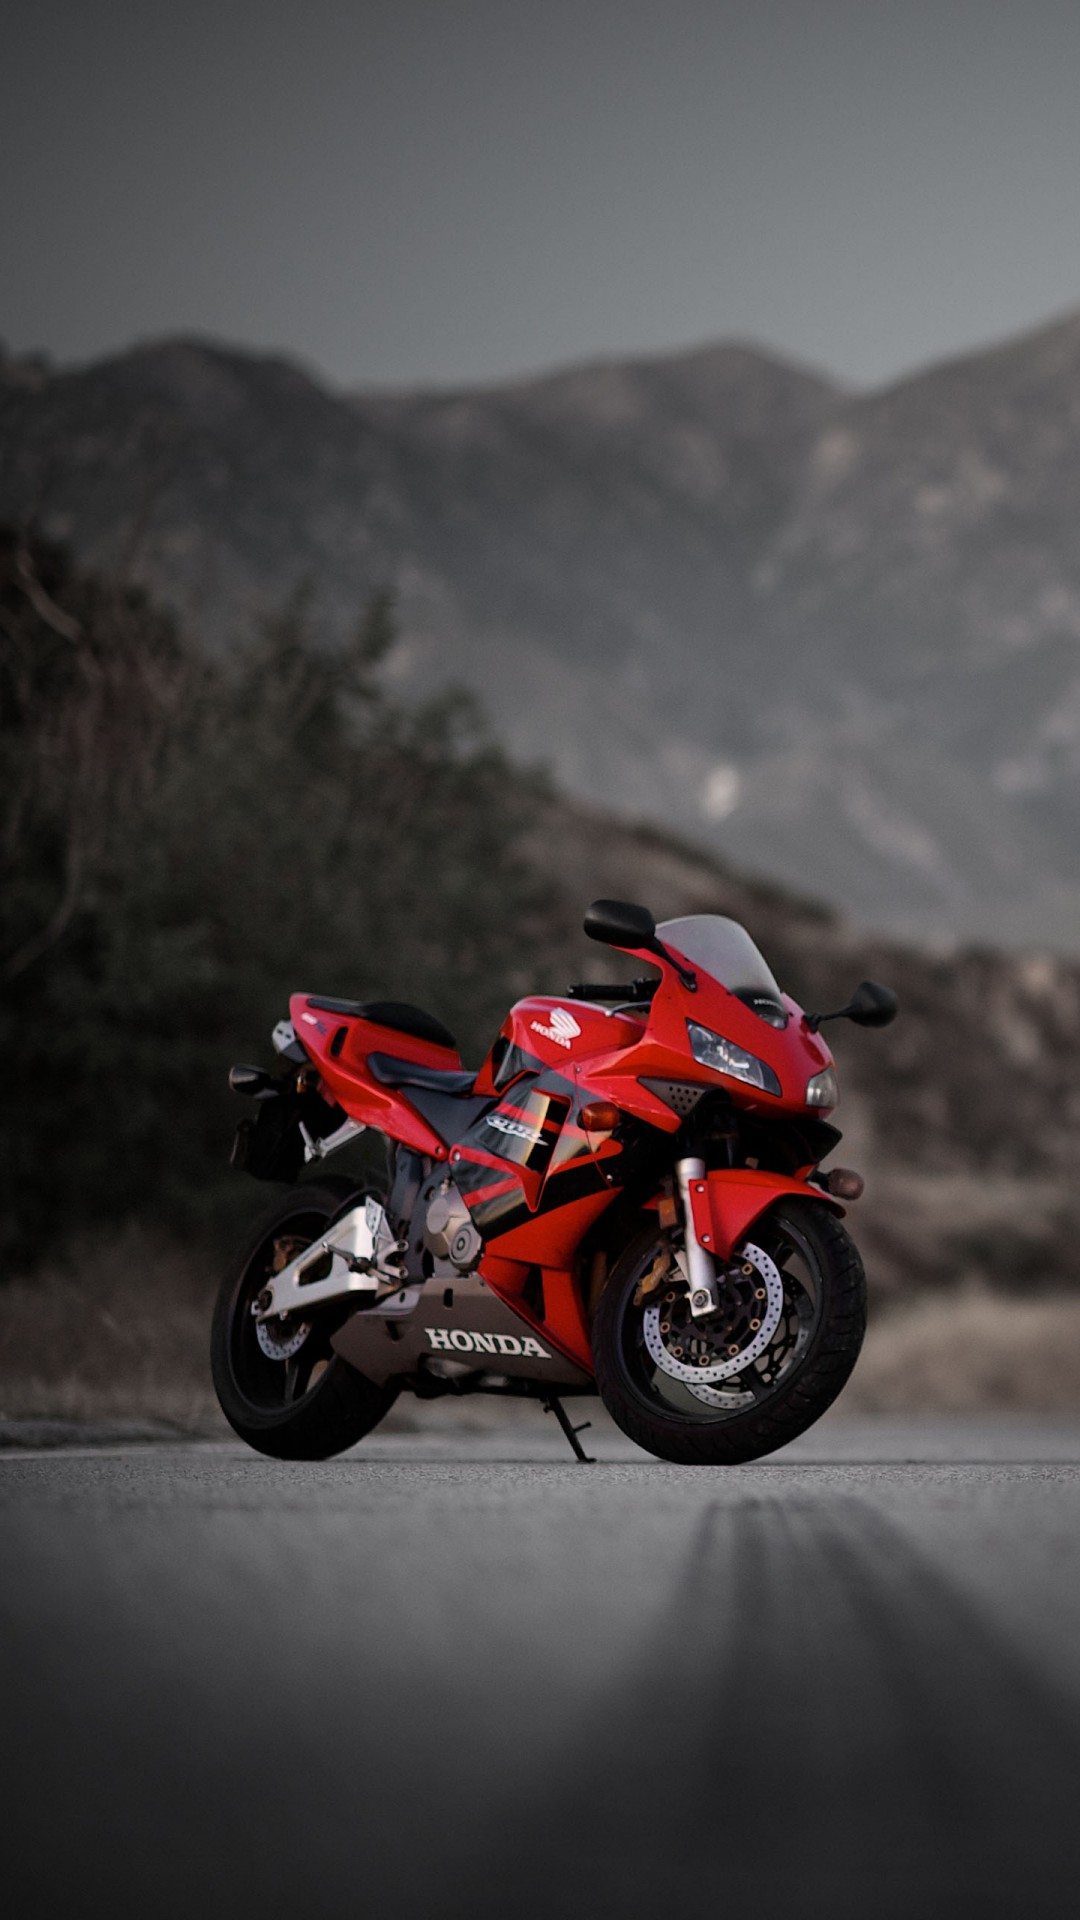 bike wallpaper for iphone,land vehicle,vehicle,motorcycle,red,car